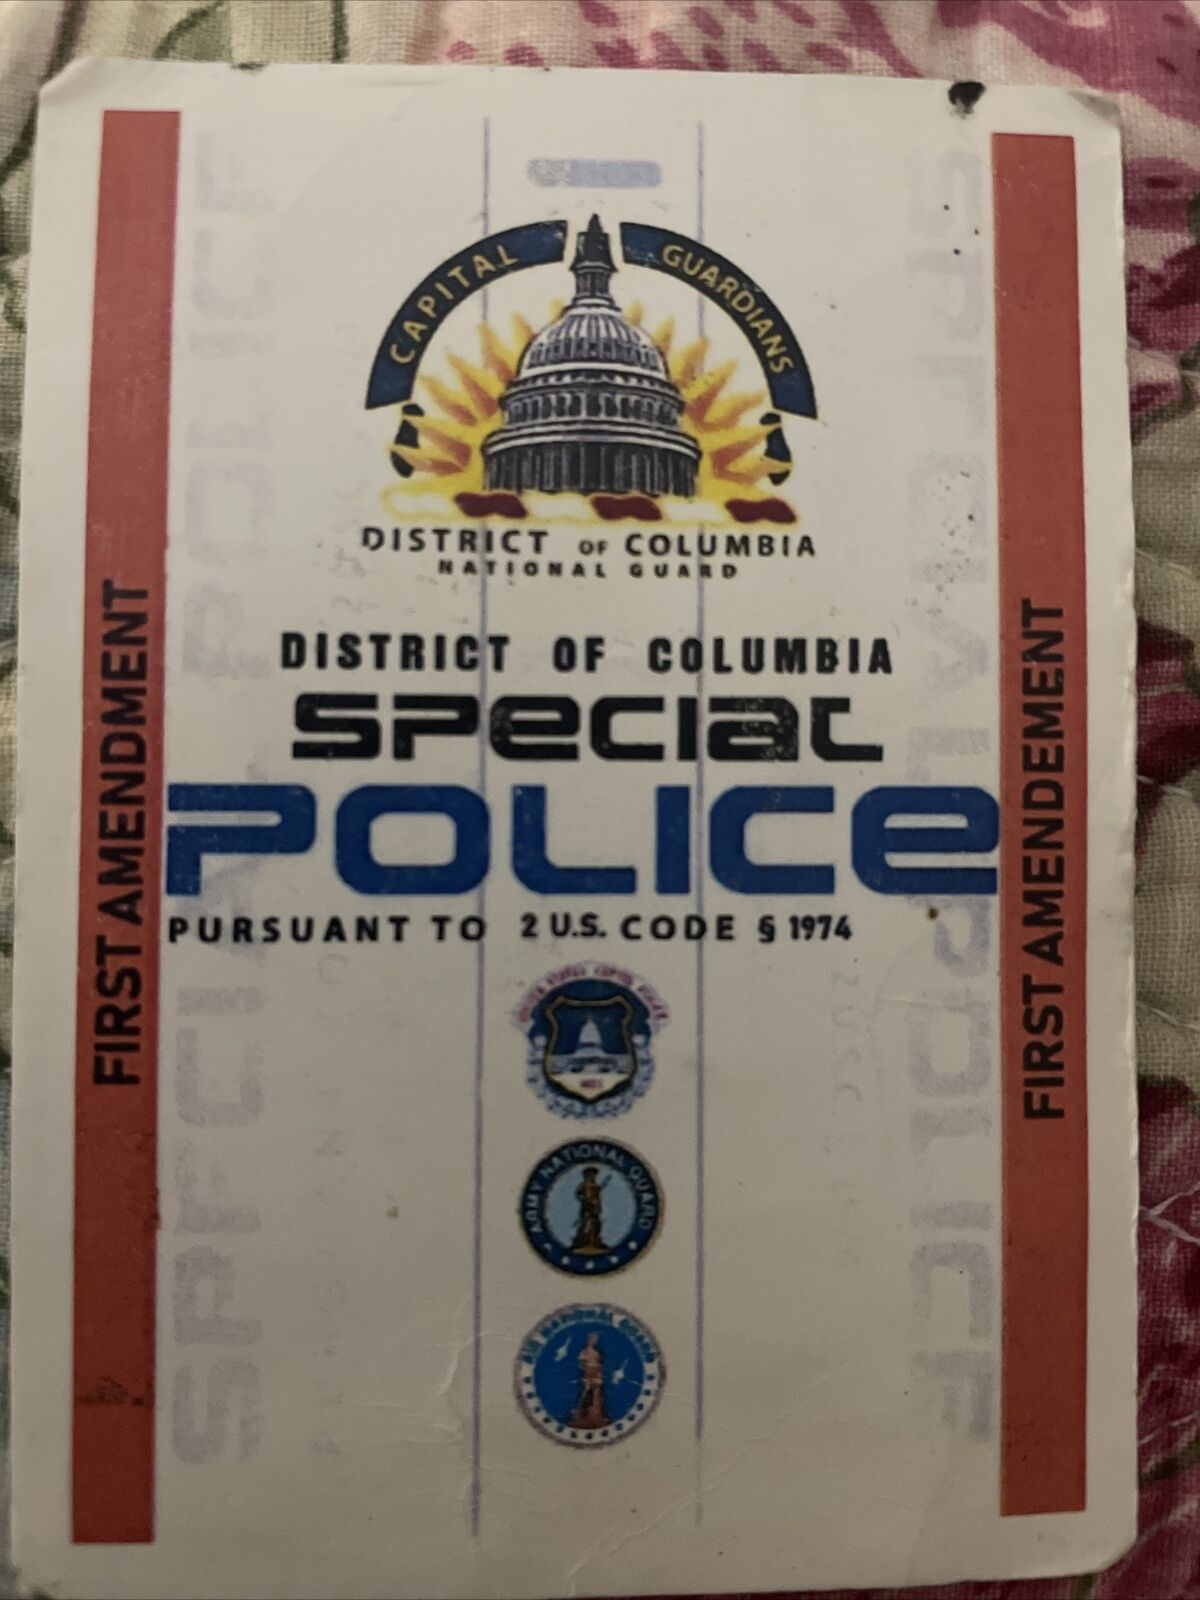 January 6th, 2021 Military card issued by the Capitol Police Board.